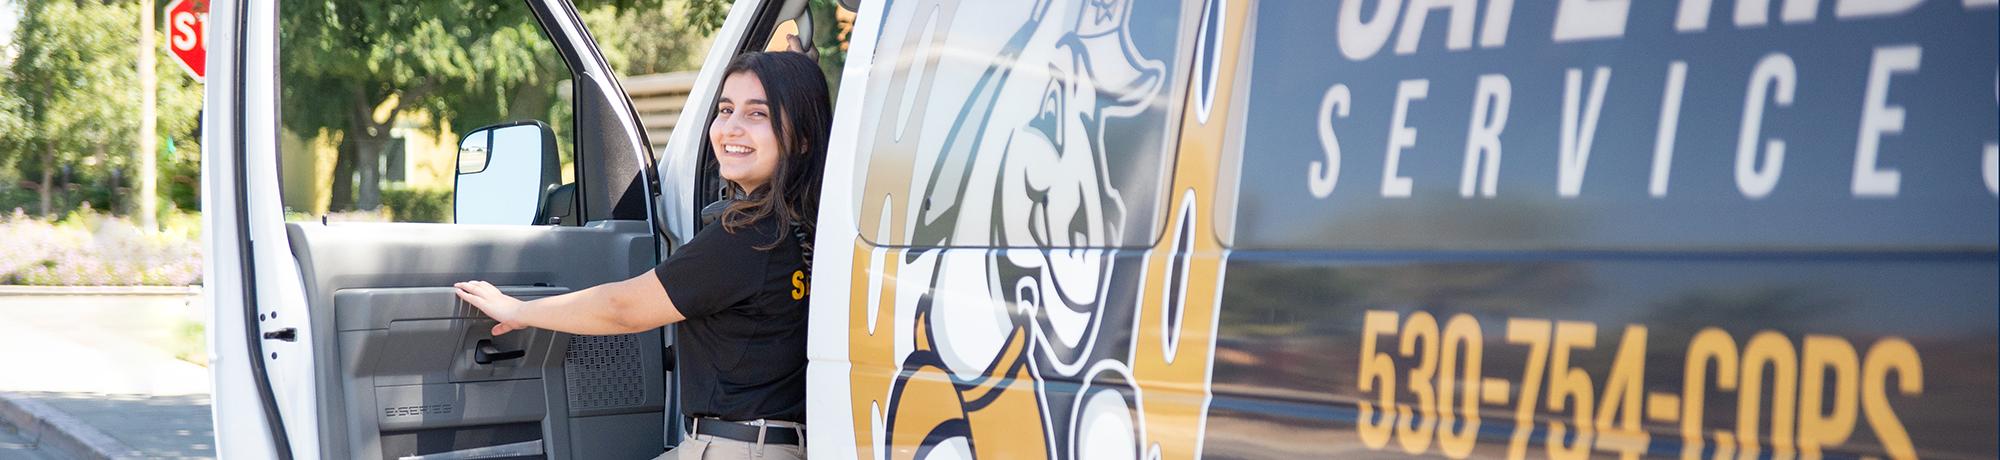 Aggie Host smiles from Safe Ride van